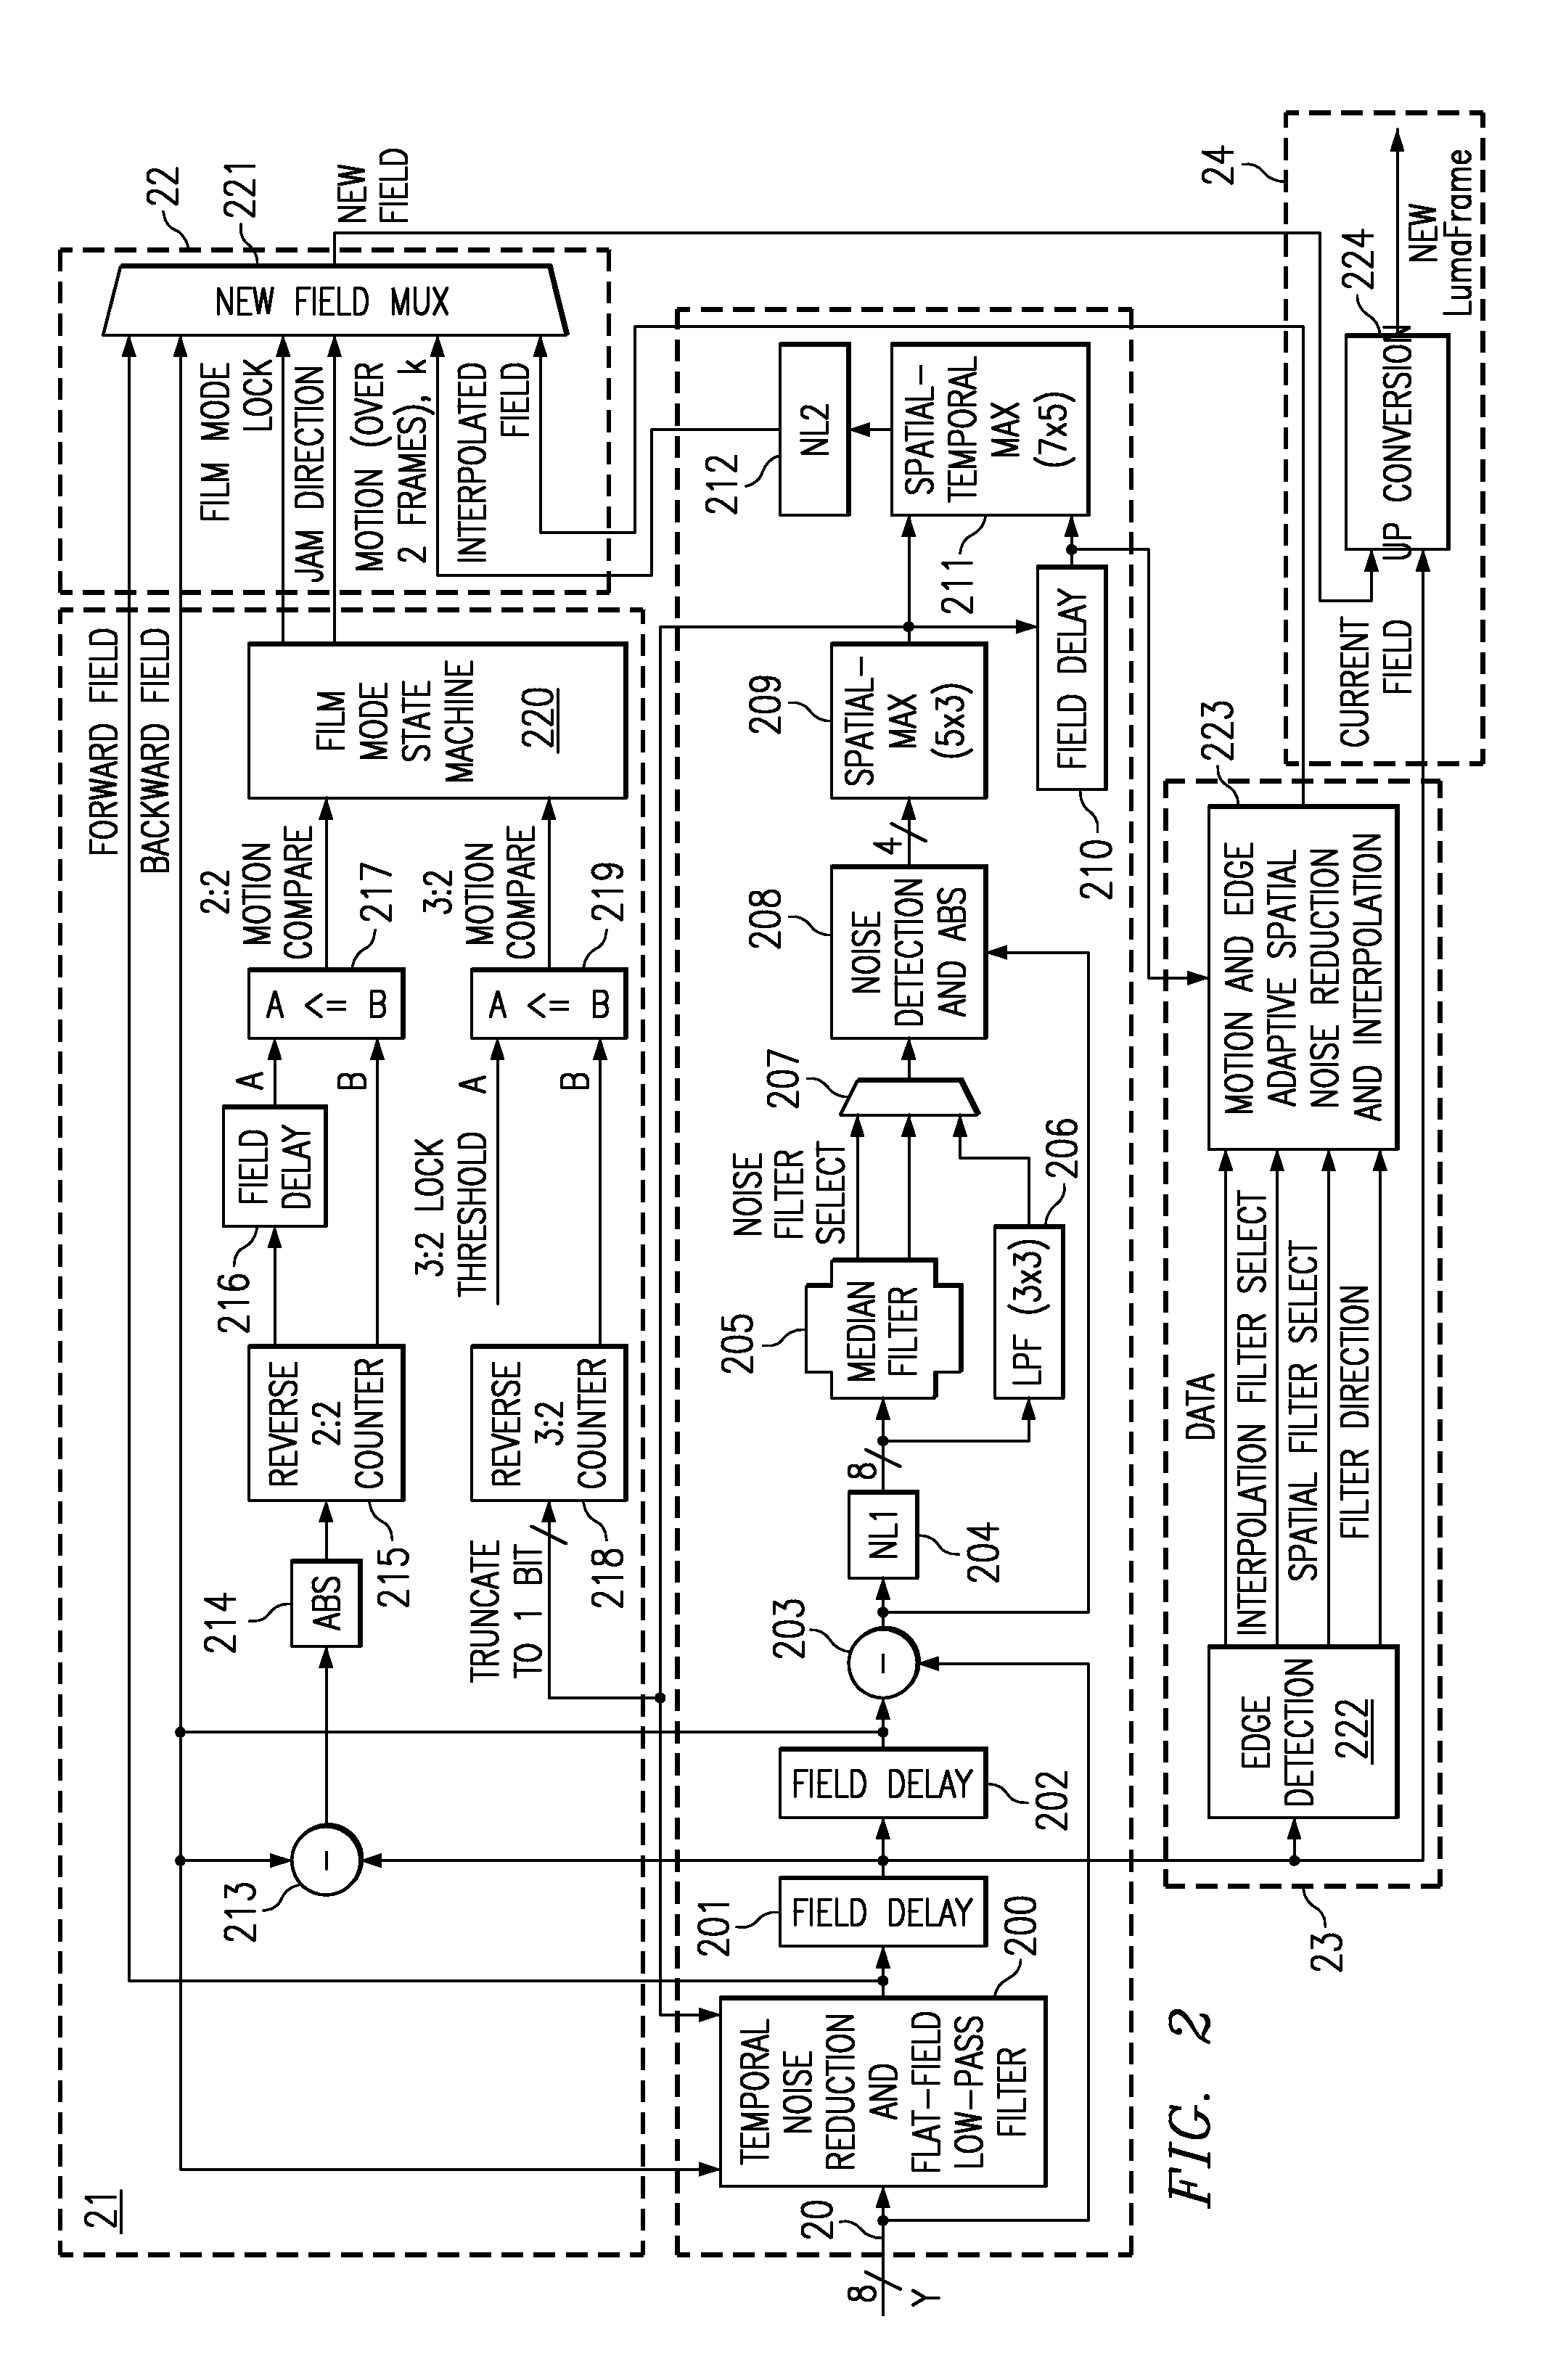 Content-Dependent Scan Rate Converter with Adaptive Noise Reduction